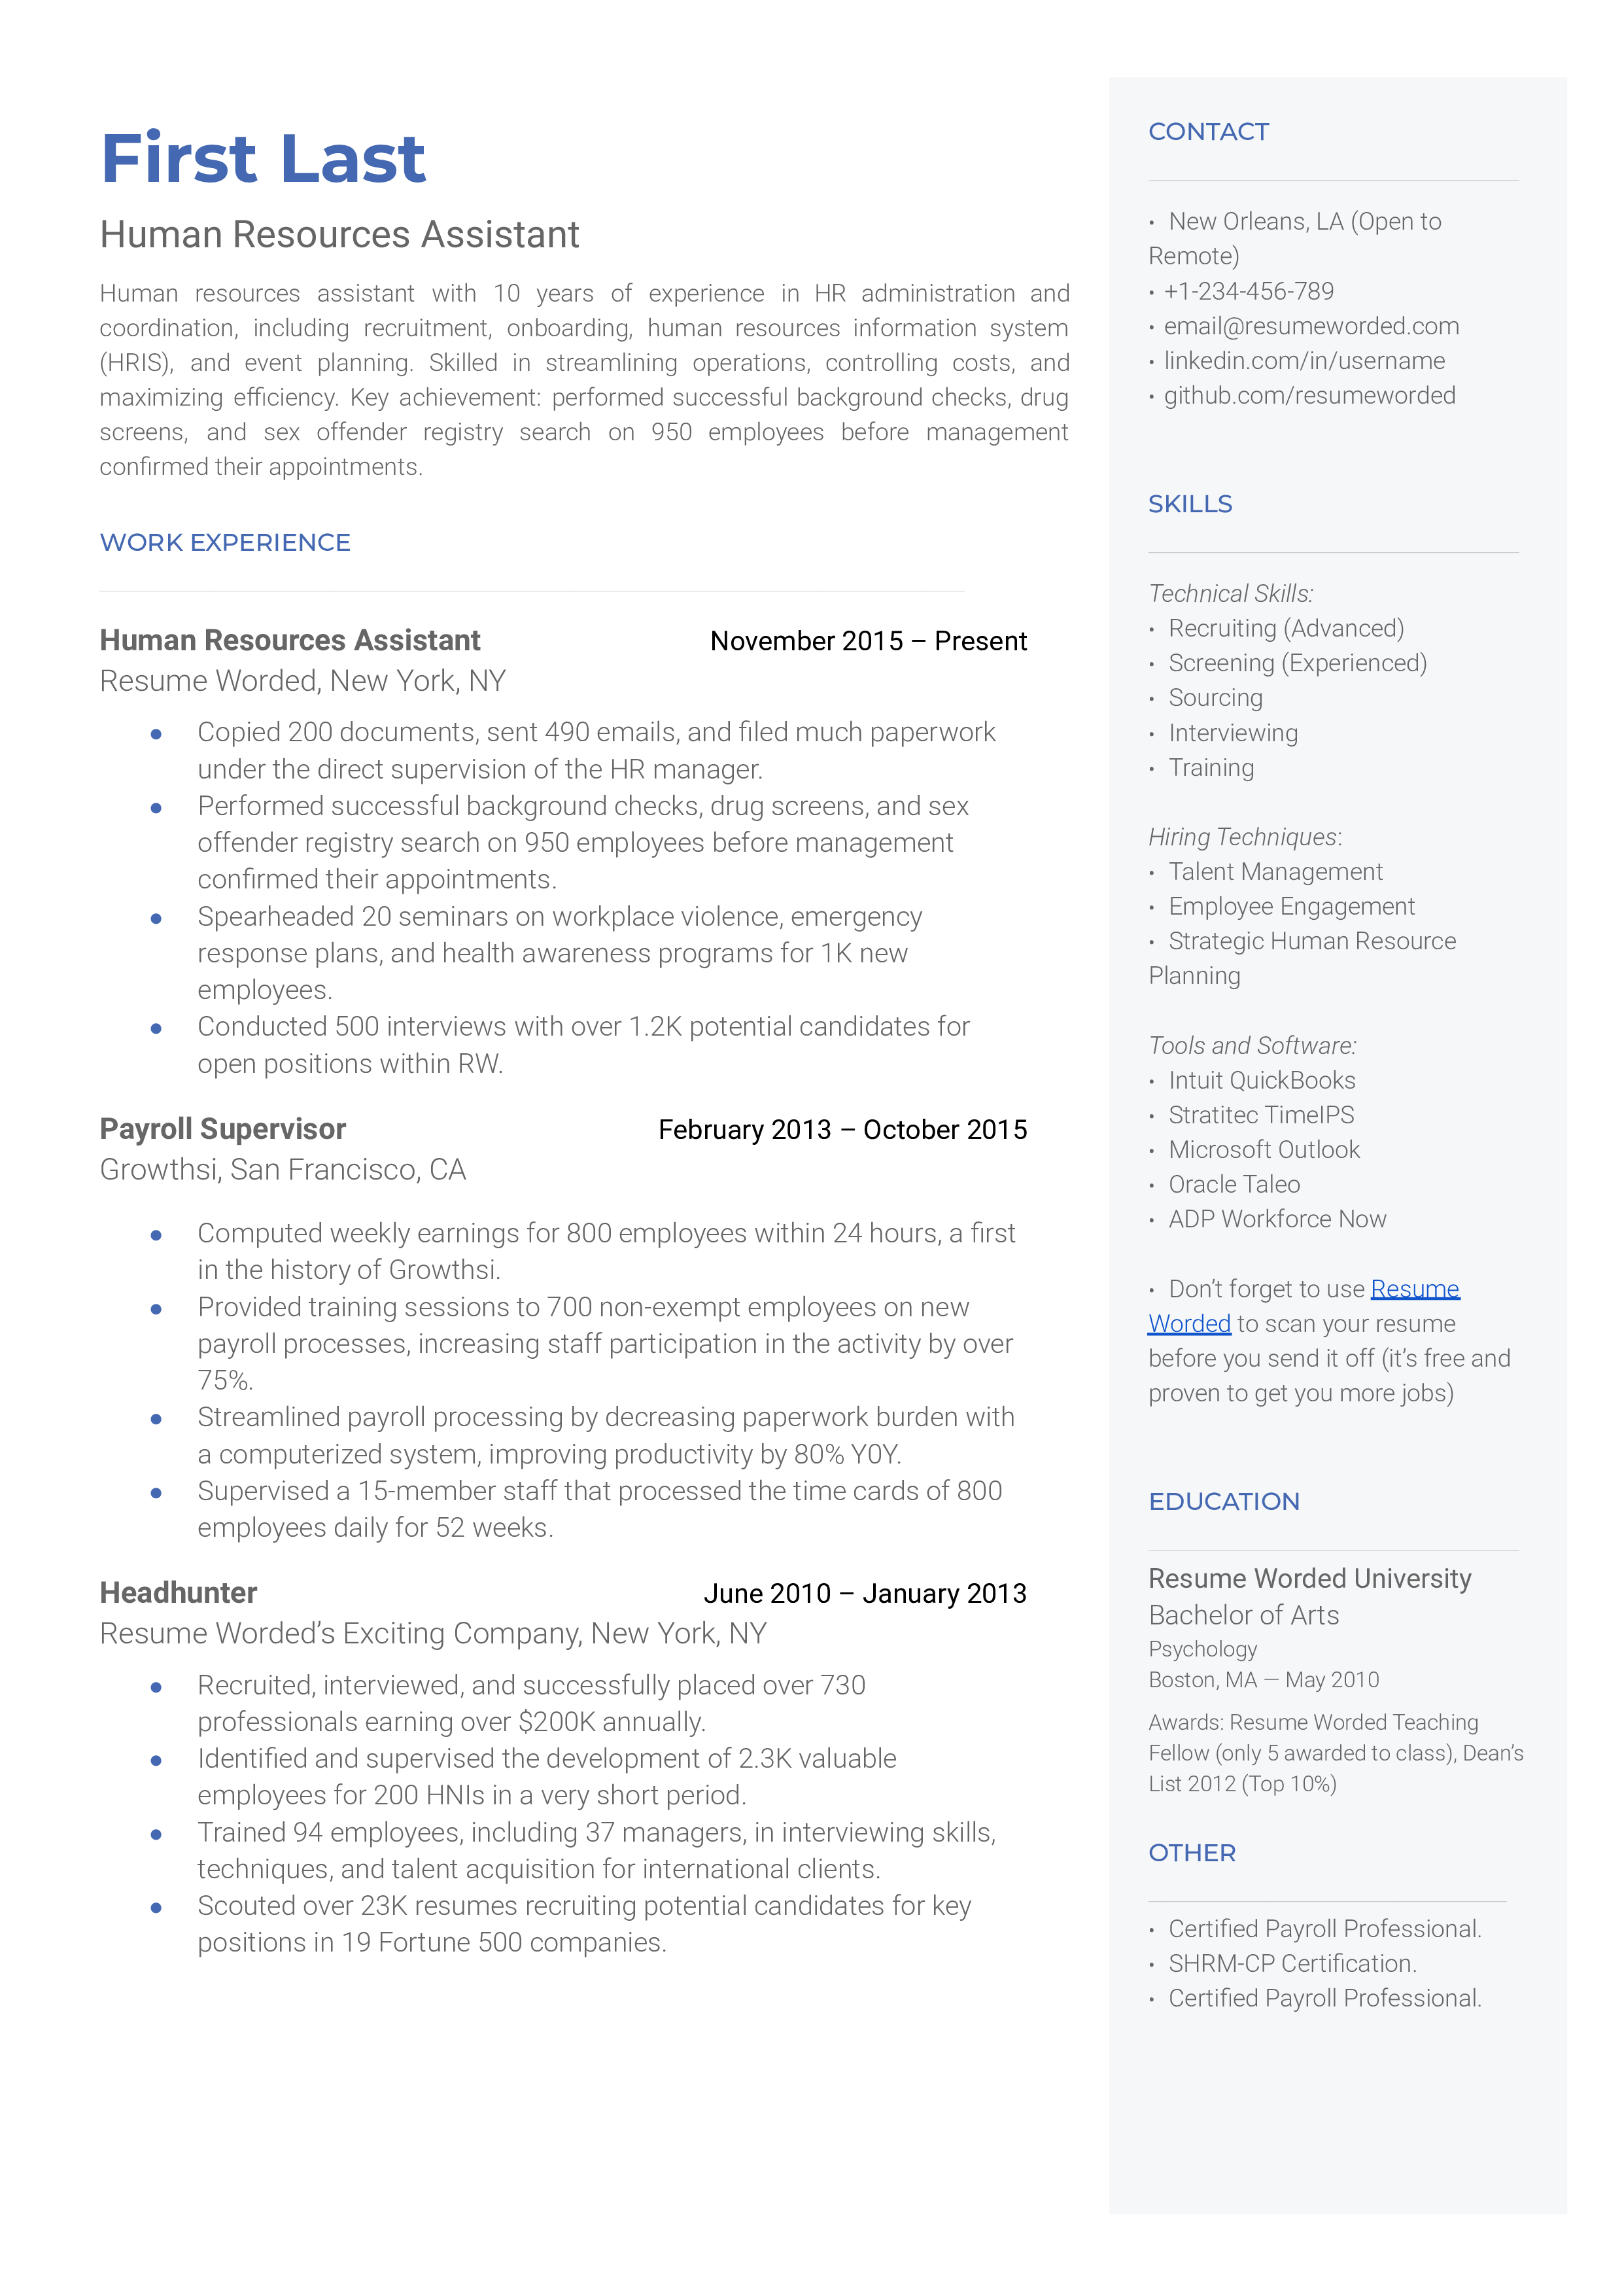 A human resources assistant resume sample that highlights the applicant’s HR-specific skill set and successful experience.